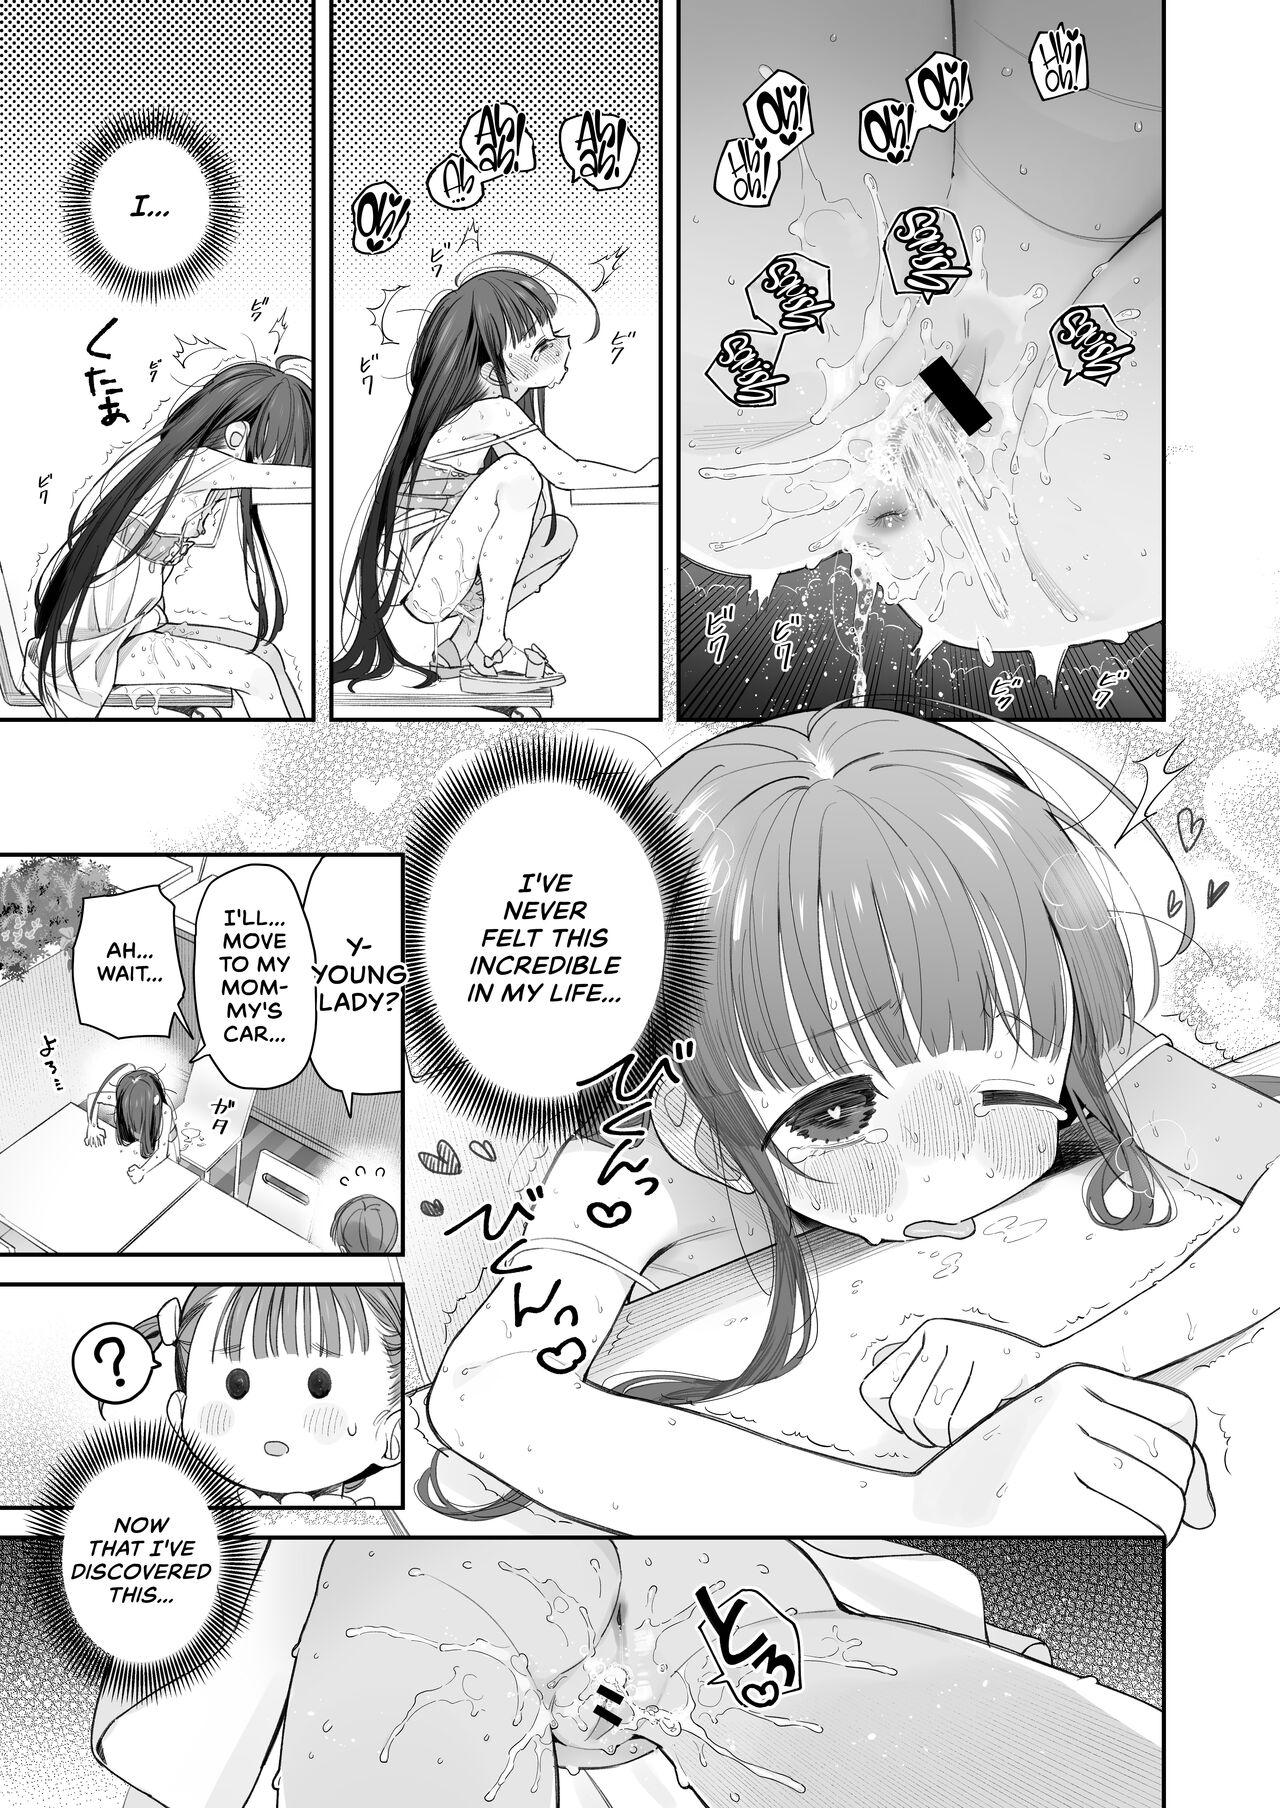 [Asunaro Neat. (Ronna)] TS Loli Oji-san no Bouken Onanie Hen | The Adventures of an Old Man Who Was Gender-Swapped Into a Loli ~Masturbation Chapter~ [English] [CulturedCommissions] [Digital] 37